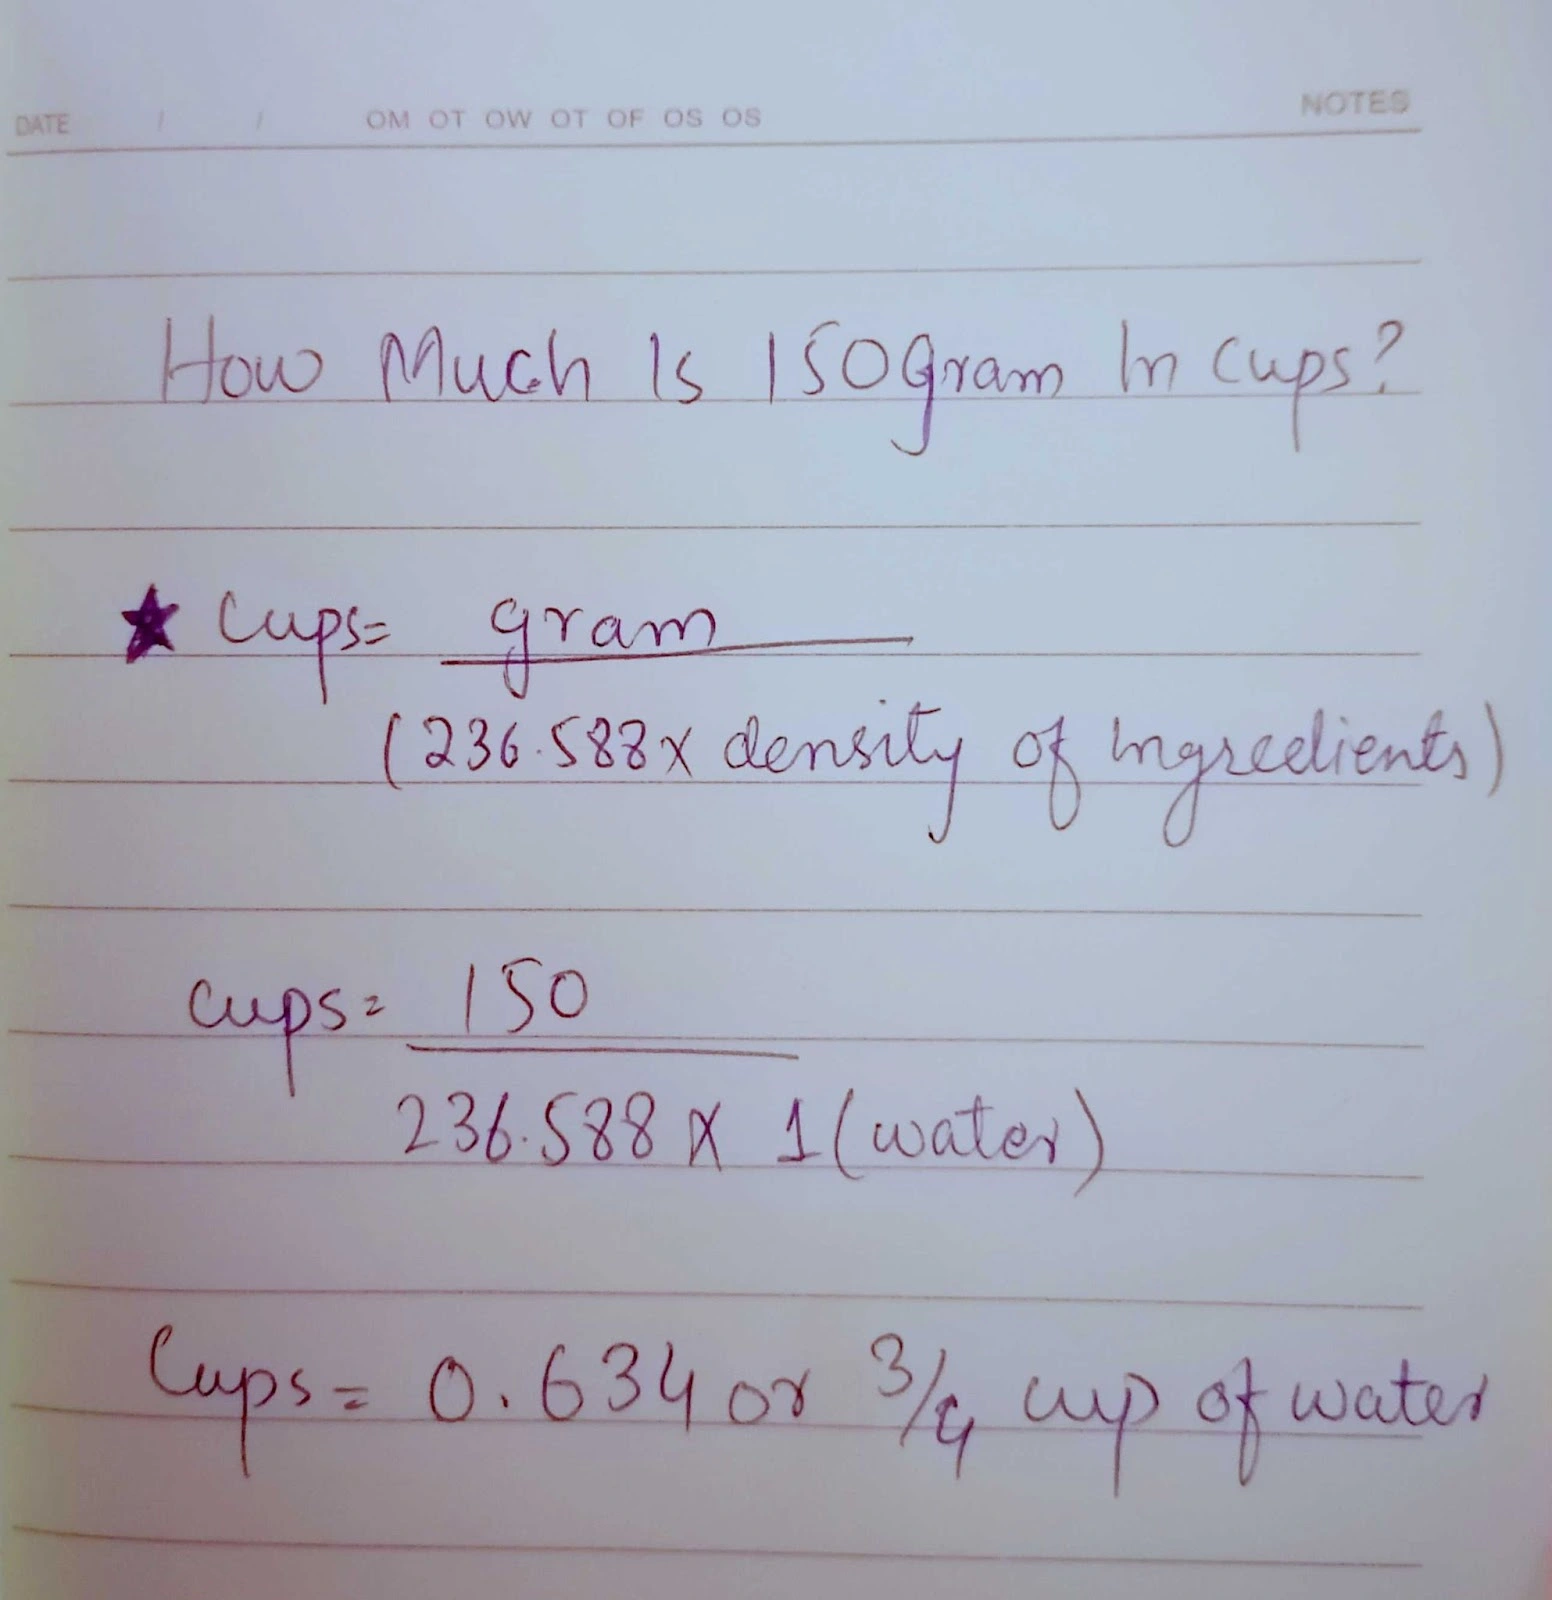 How Much Is 150g In Cups?